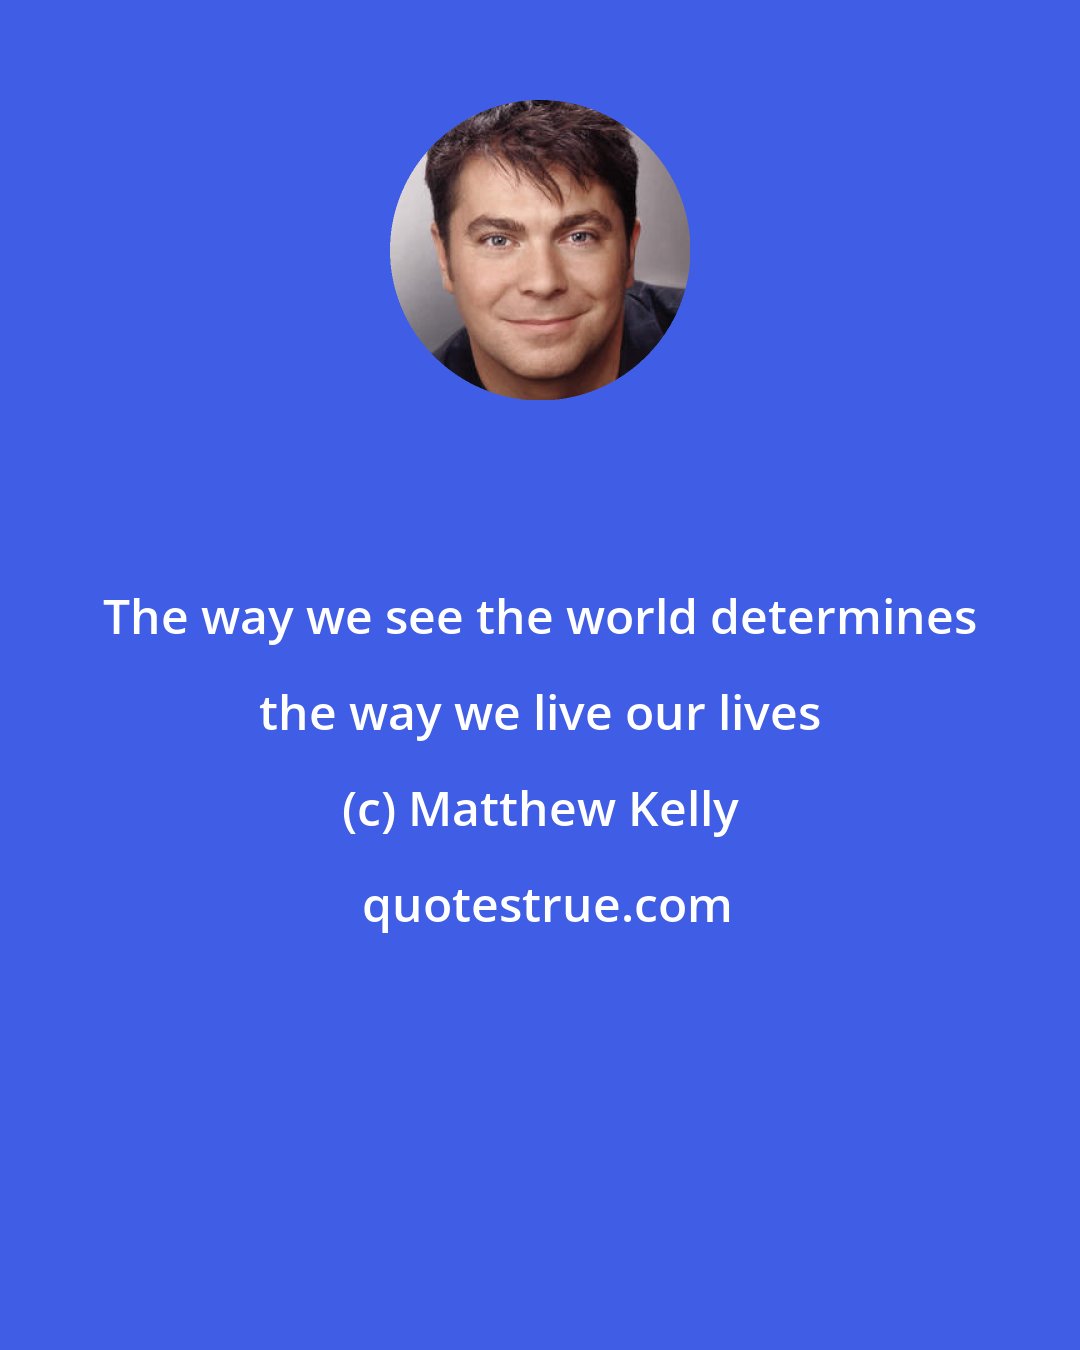 Matthew Kelly: The way we see the world determines the way we live our lives